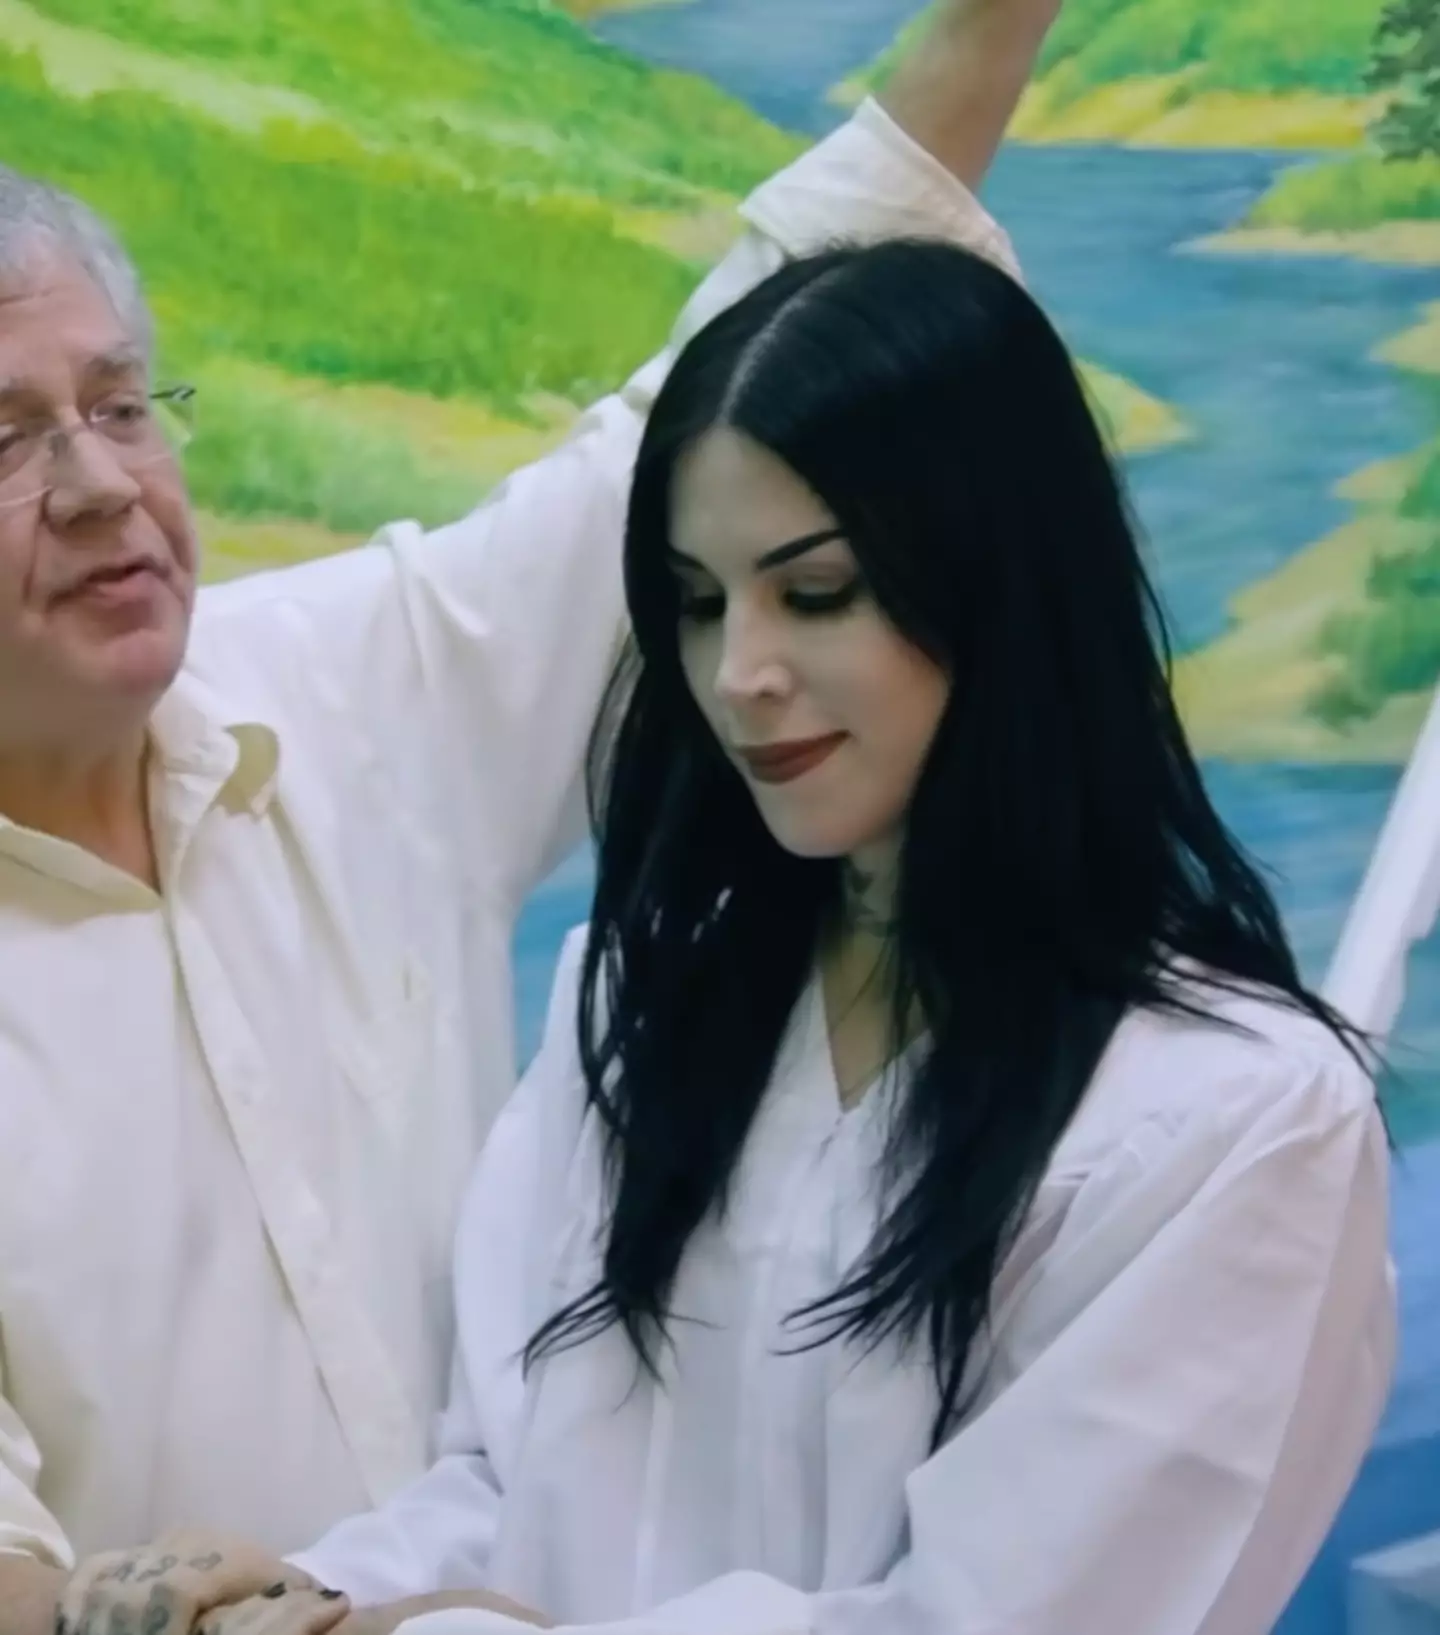 Kat Von D shared a video of herself being baptised on Instagram.